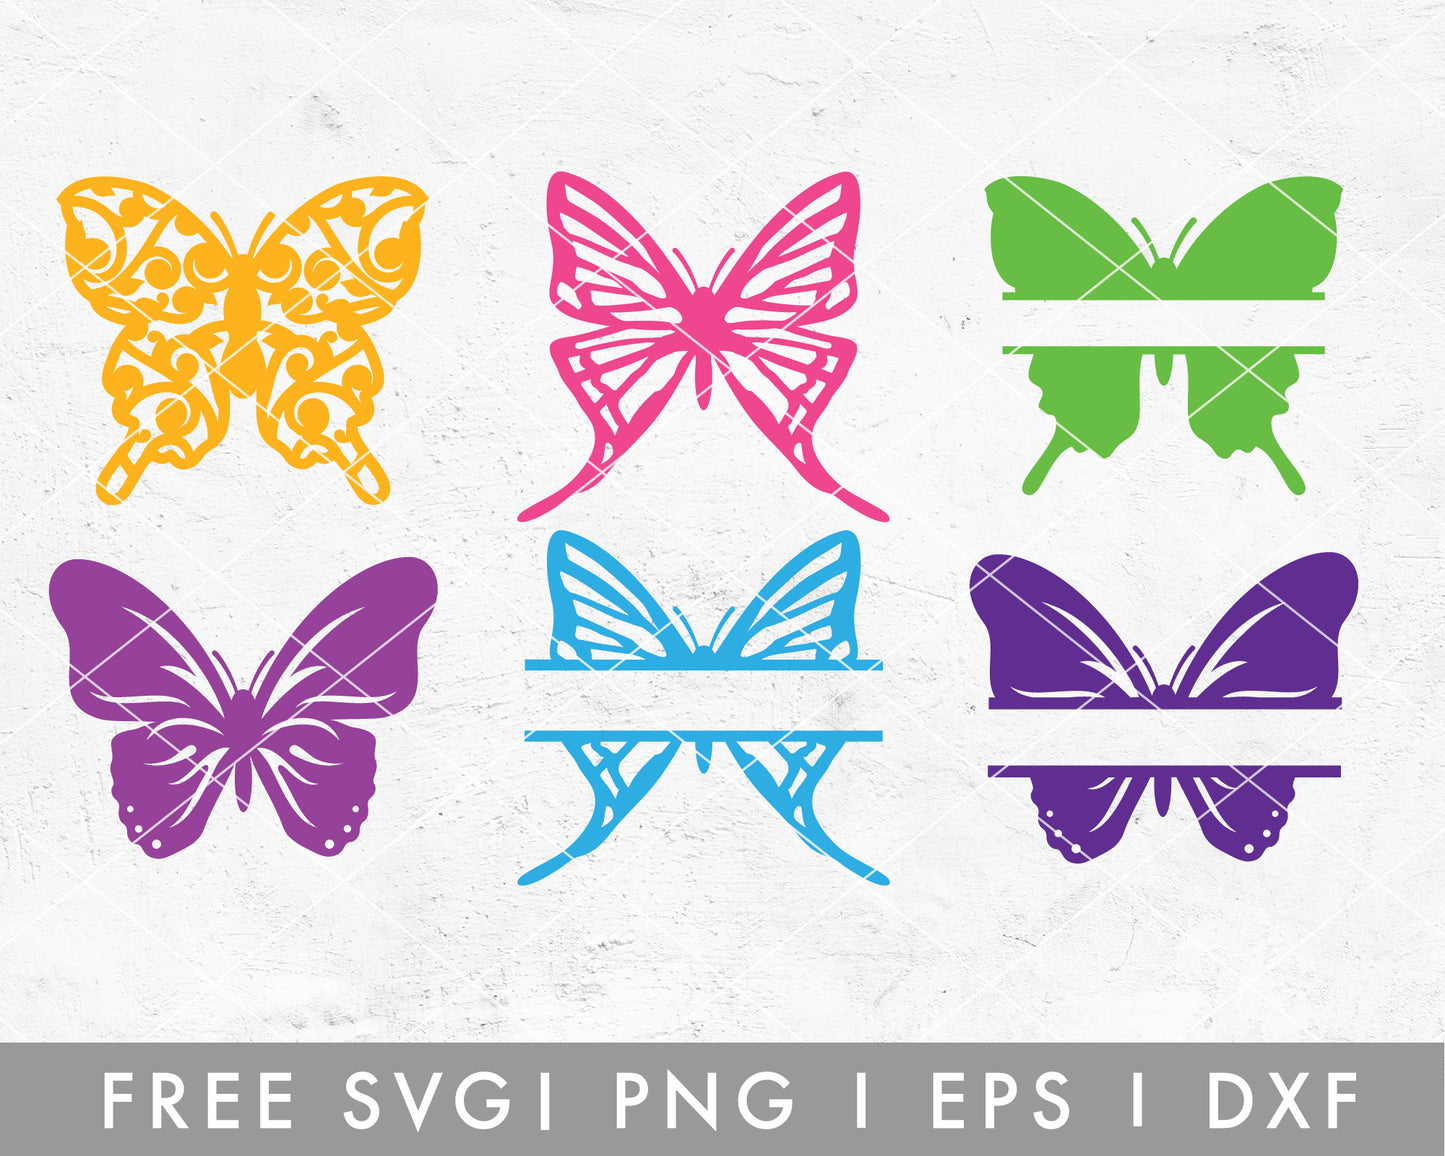 FREE Butterfly SVG | Butterfly Monogram SVG Cut File for Cricut, Cameo Silhouette | Free SVG Cut File